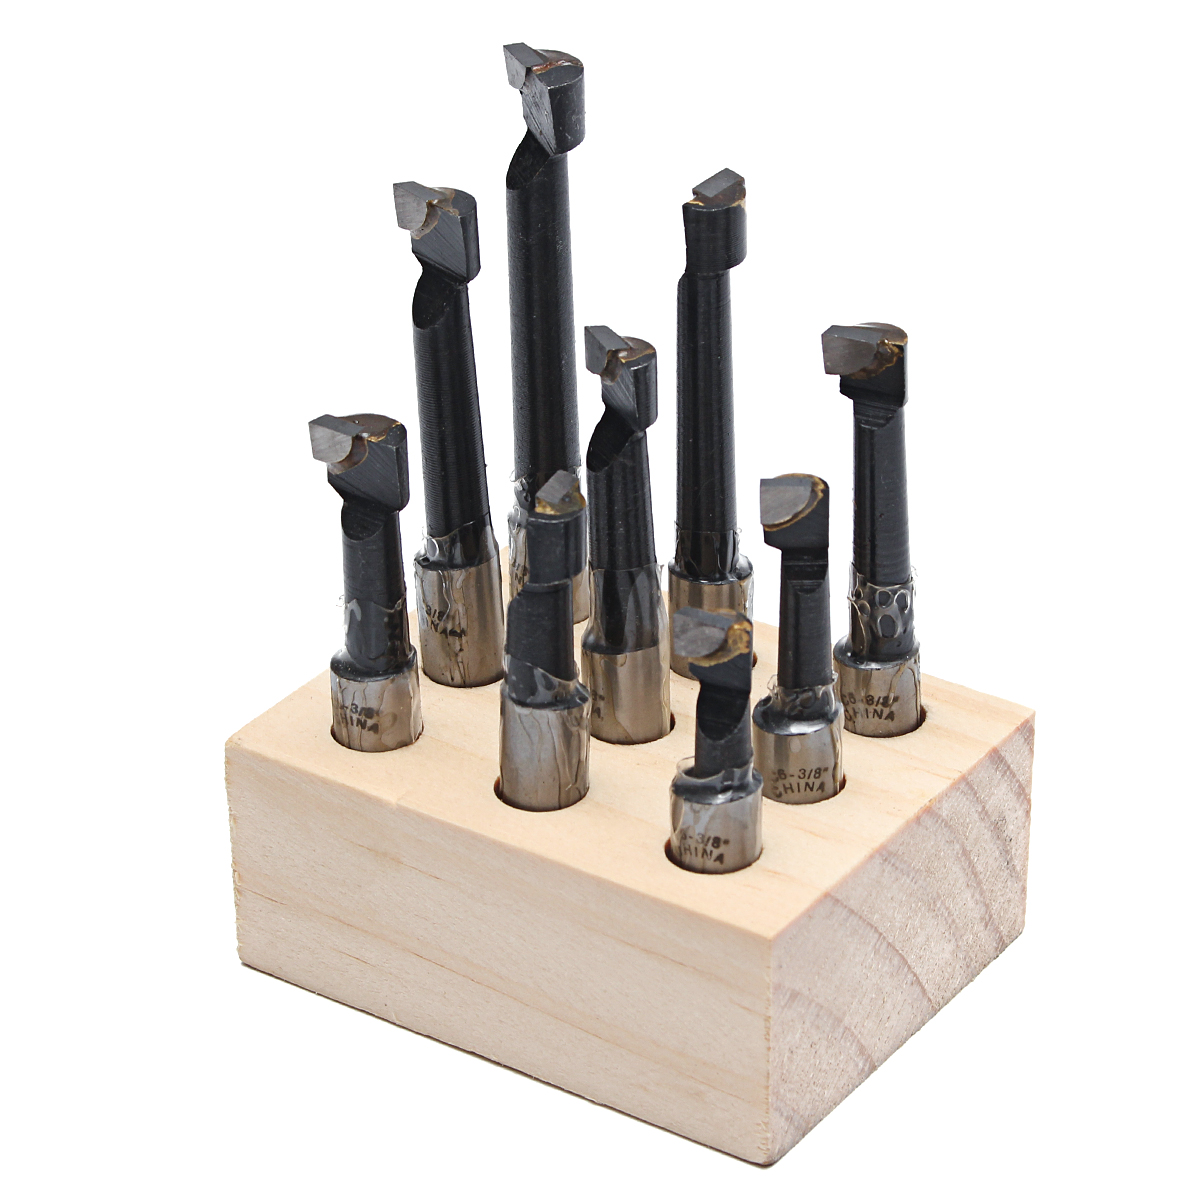 Mini-Quick-Change-Tool-Post-Holder-Set-with-9pcs-38-Inch-Boring-Bar-and-5pcs-Indexable-Blade-1190276-4